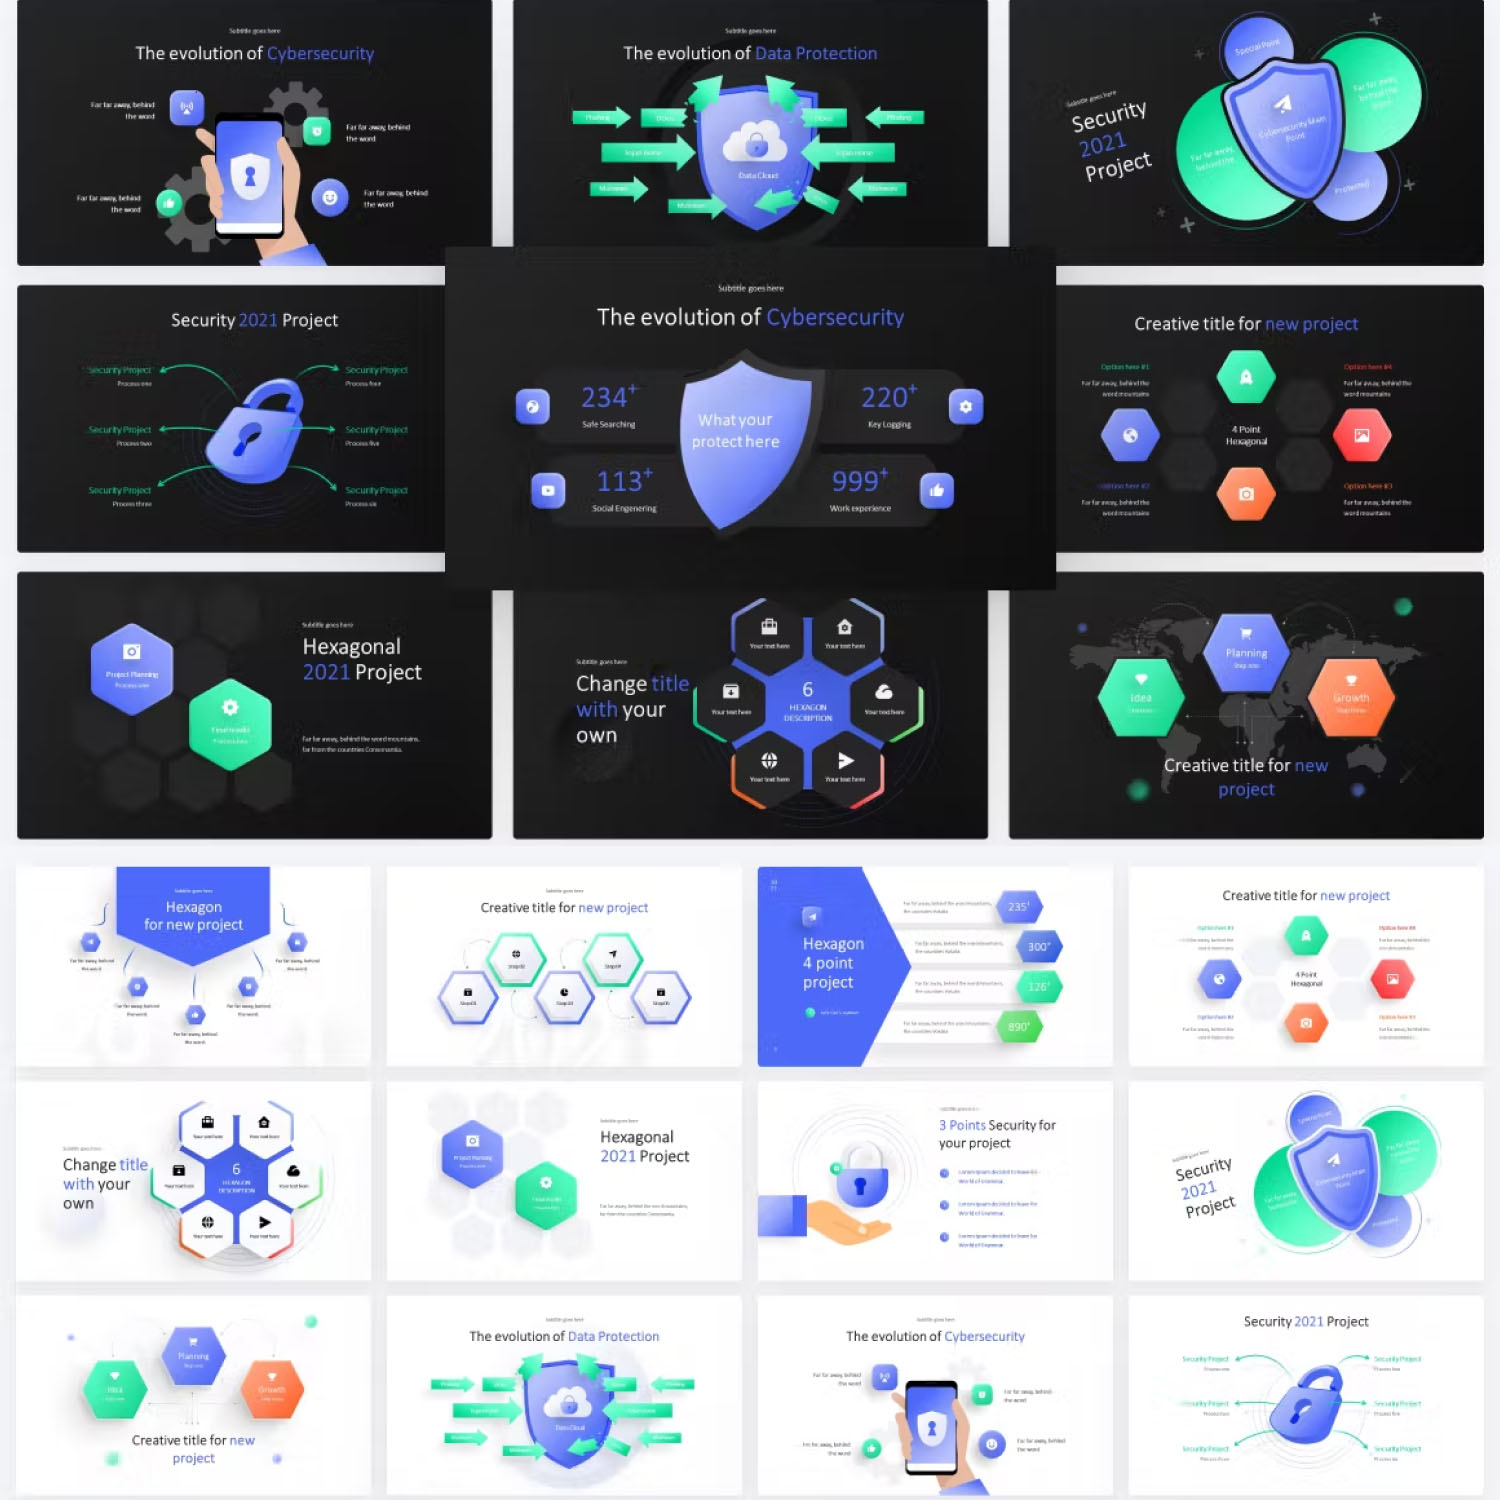 Preview security hexagonal powerpoint template.